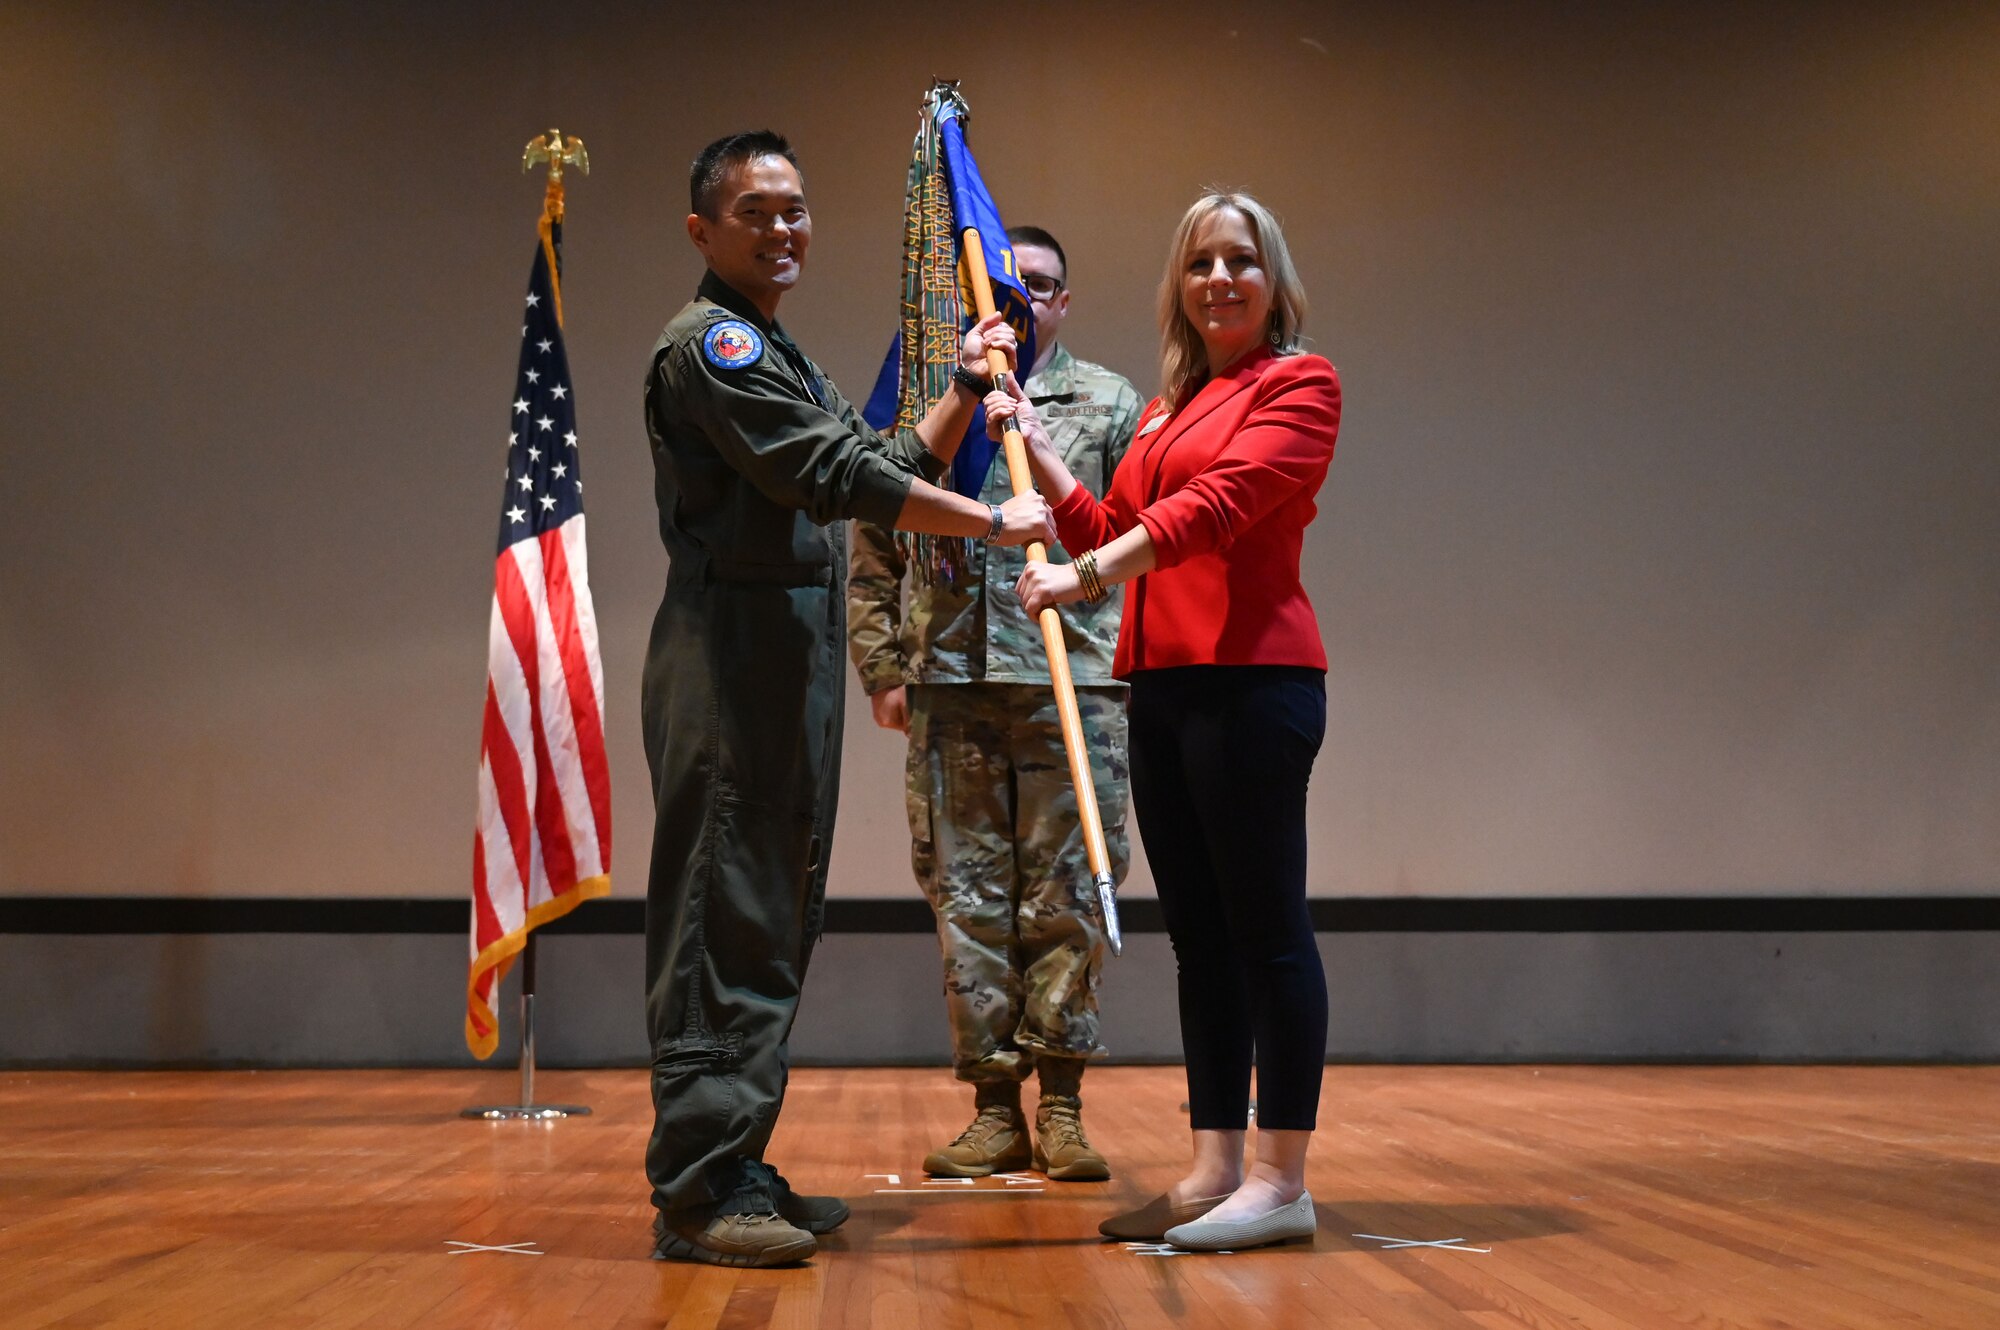 U.S. Air Force Lt. Col. Chad Nishizuka, 16th Electronic Warfare Squadron commander, inducts Melanie Moore, director of education and community engagement for the Mattie Kelly Arts Foundation, during the wing’s first Honorary Commander Induction ceremony, at Eglin Air Force Base, Fla., Dec. 1, 2023. Honorary Commanders serve as the liaison between the 350th Spectrum Warfare Wing and the surrounding community by maintaining strong relations through mutually beneficial professional partnership. (U.S. Air Force photo by Staff Sgt. Ericka A. Woolever)